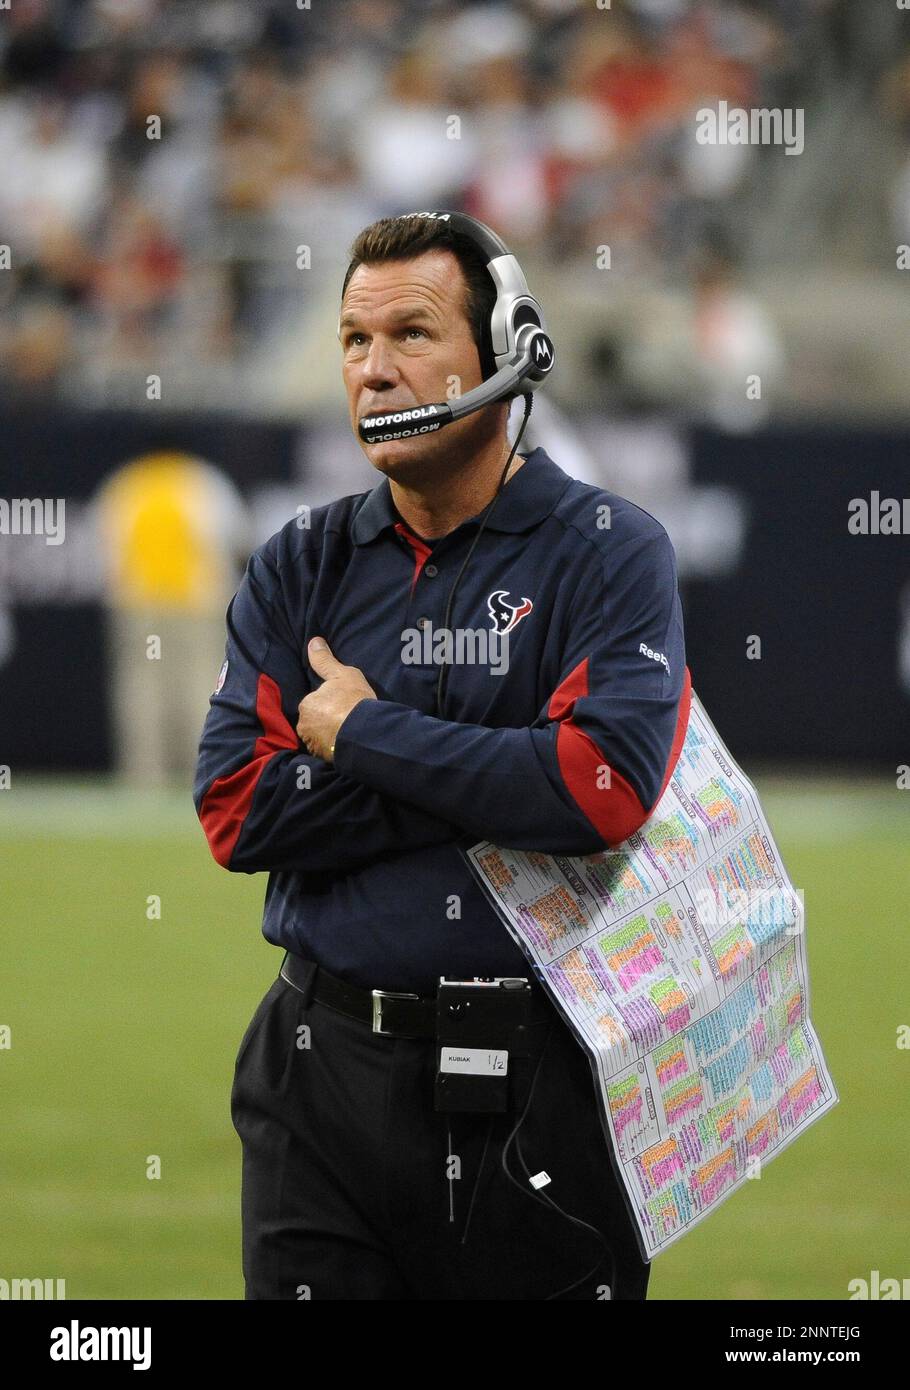 28 August 2010: Houston Texans coach Gary Kubiak watches from the sideline  in the second half against the Dallas Cowboys. The Texans defeated the  Cowboys 23-7 at Reliant Stadium in Houston, TX. (